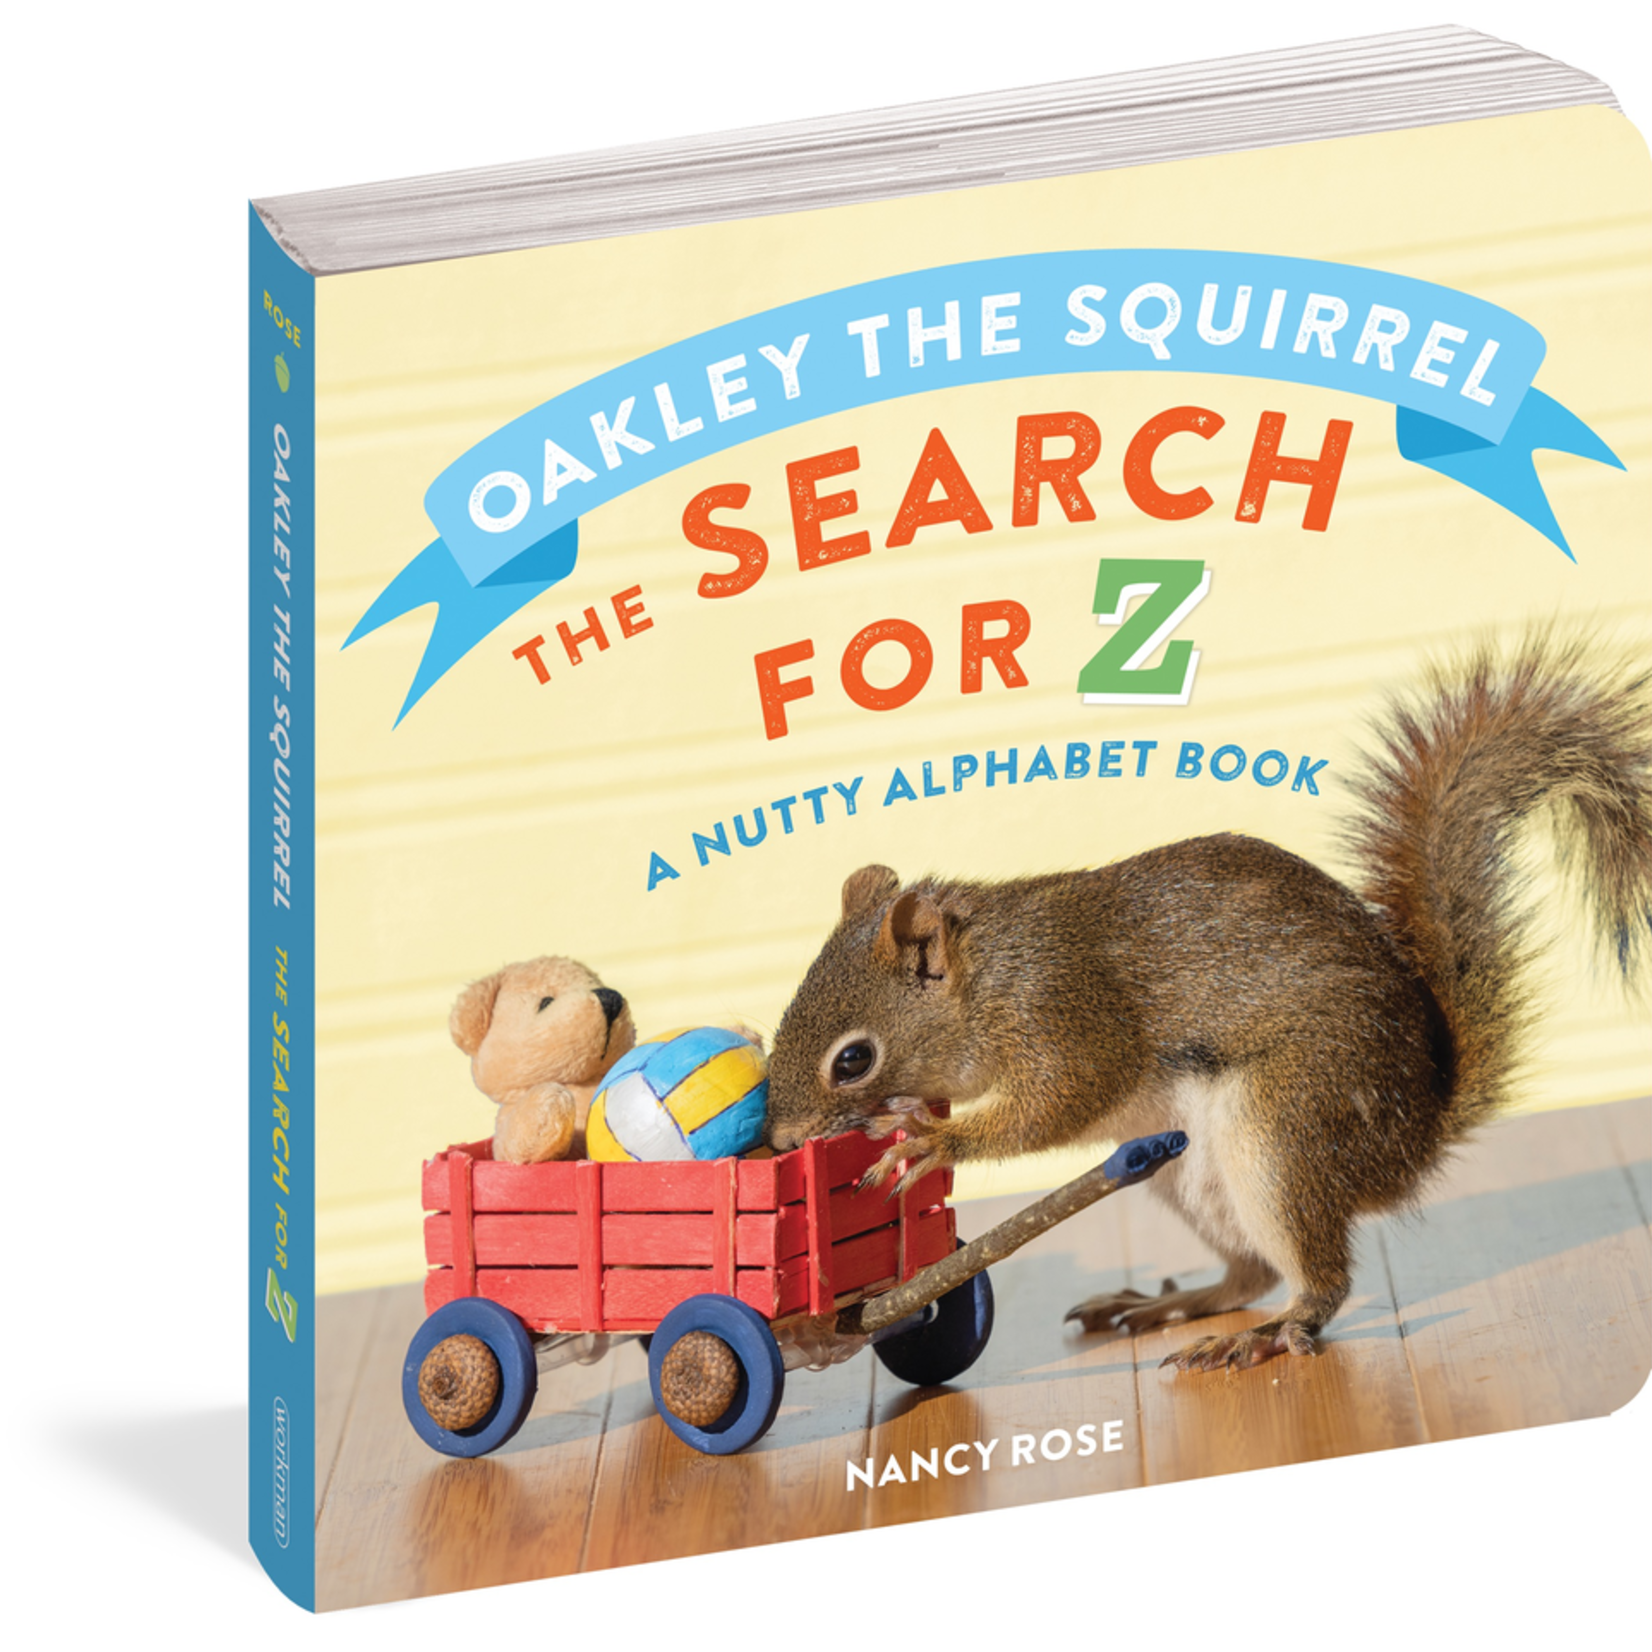 Books - Kids Oakley The Squirrel Search For Z